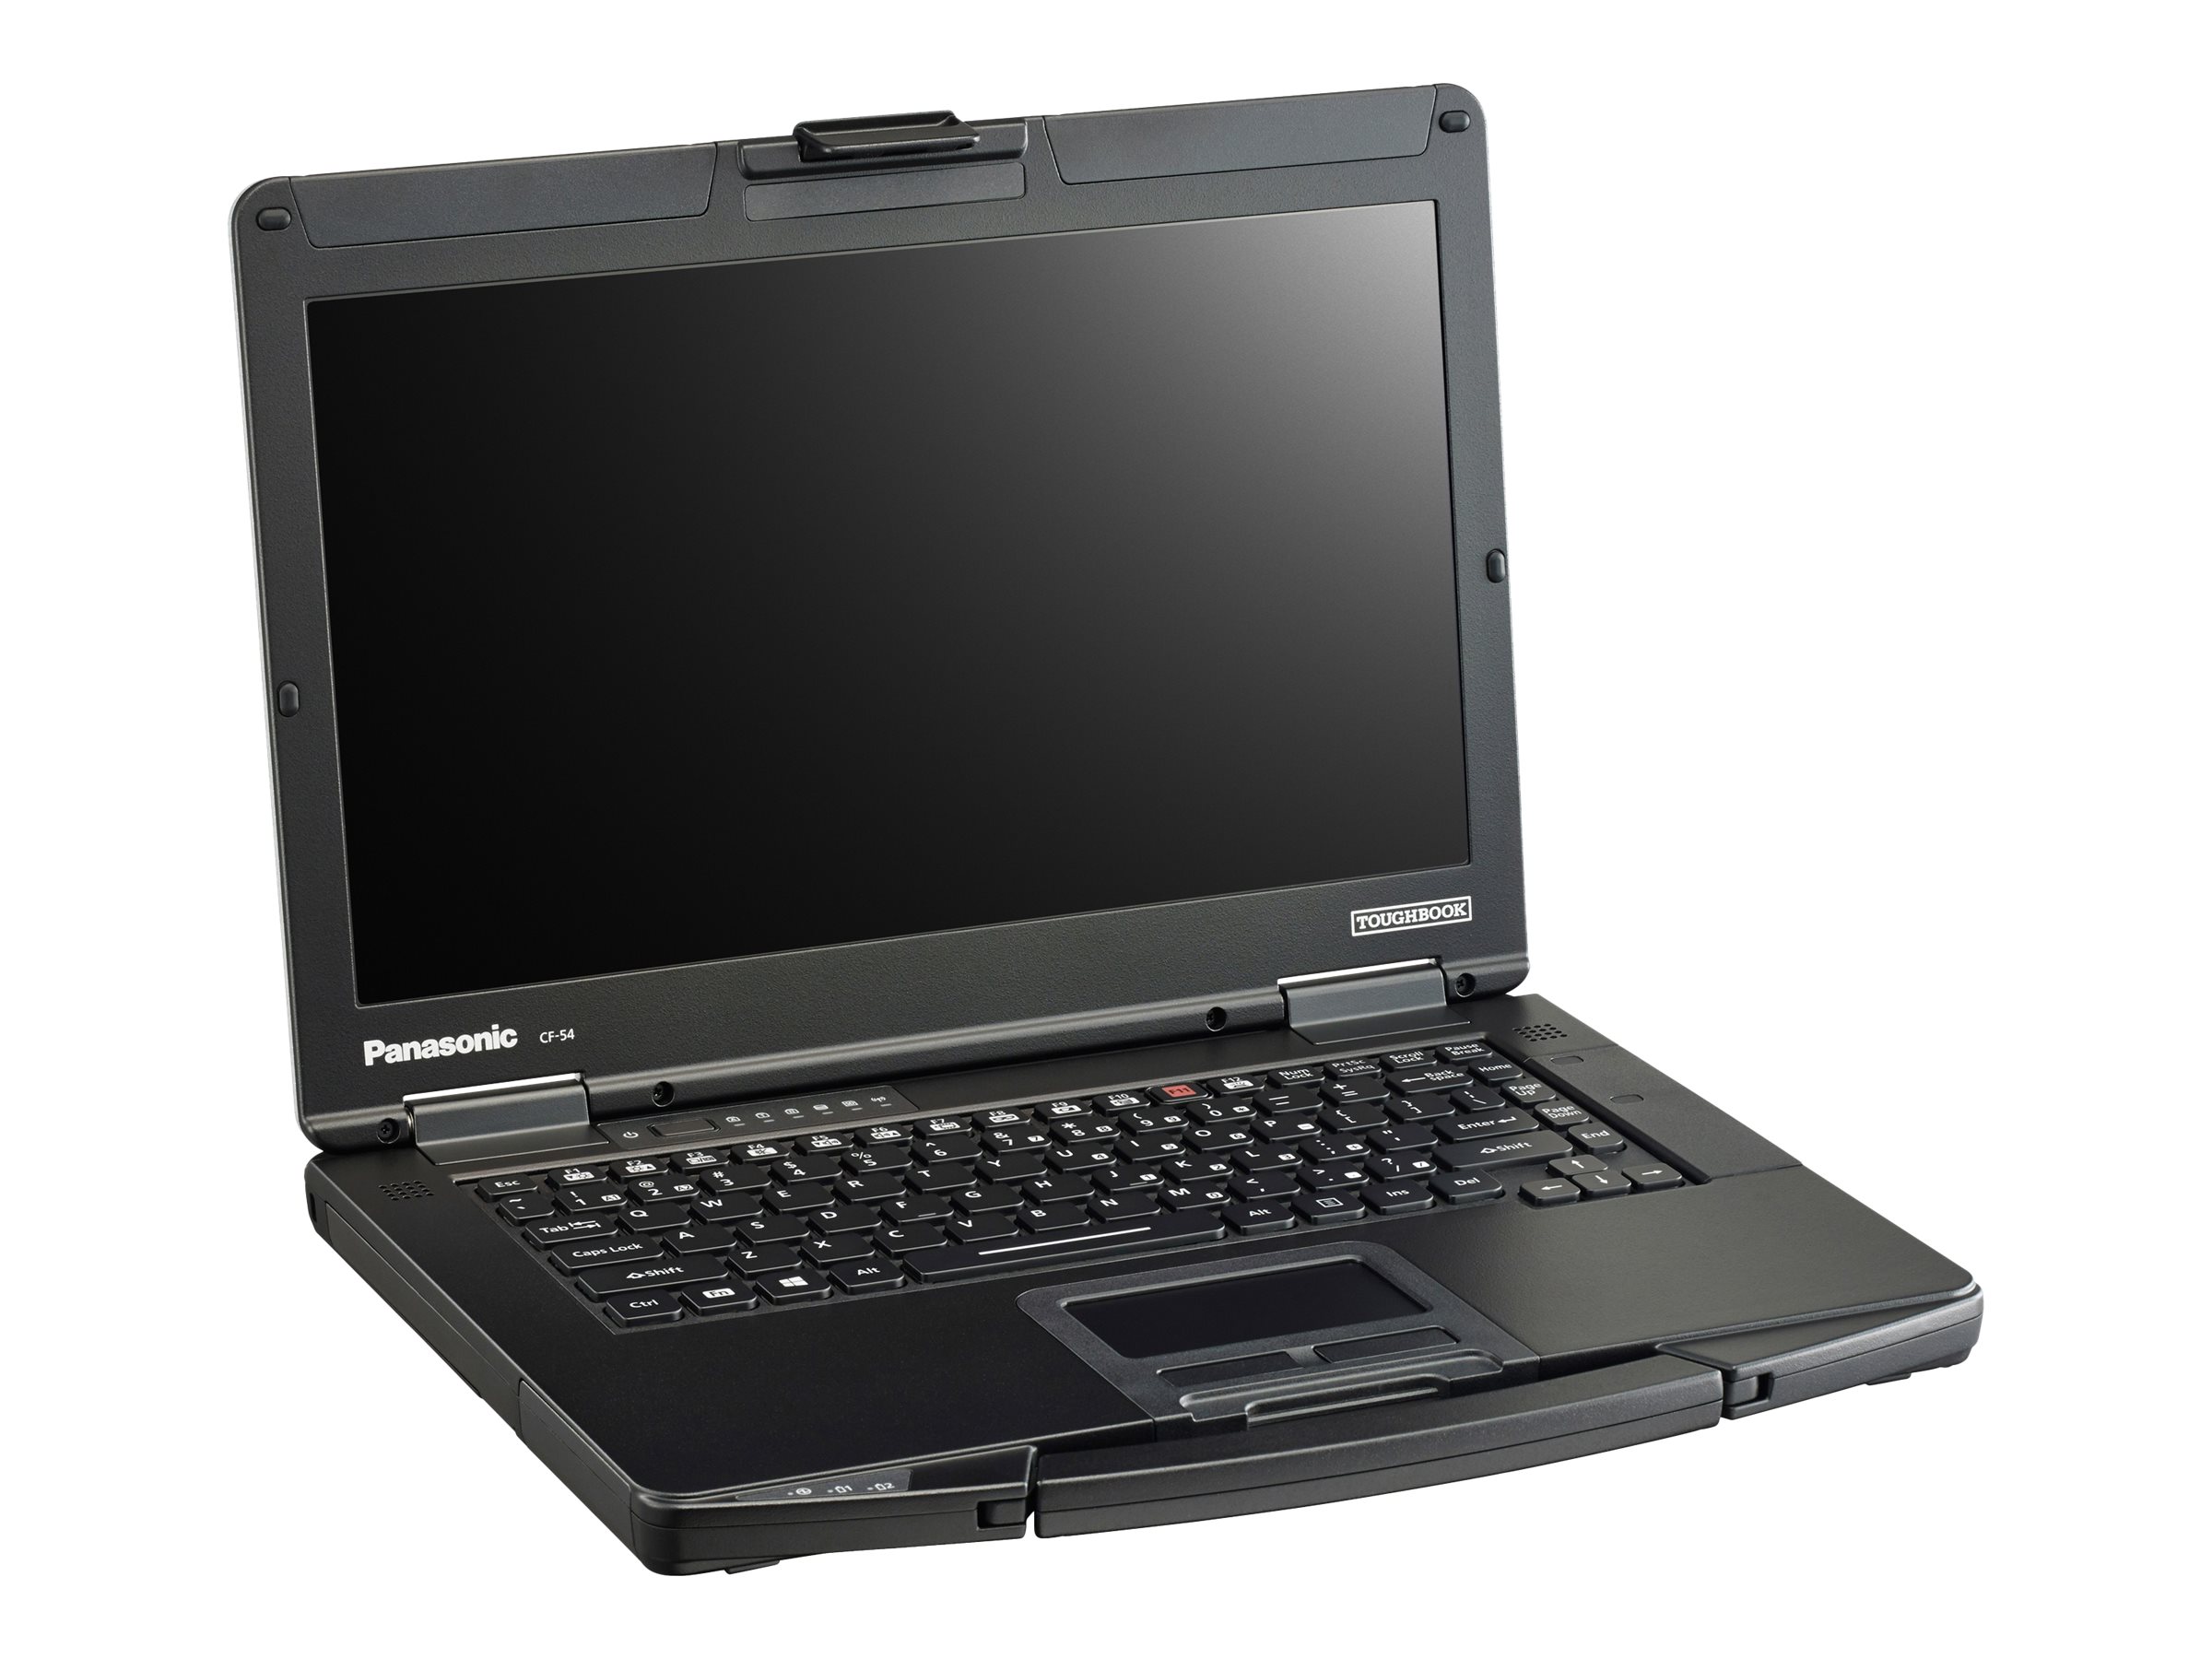 Panasonic Toughbook 54 Prime - Intel Core i5 - 7300U / up to 3.5 GHz - Win 10 Pro - HD Graphics 620 - 8 GB RAM - 256 GB SSD - DVD SuperMulti - 14" 1366 x 768 (HD) - with Toughbook Preferred - image 4 of 16